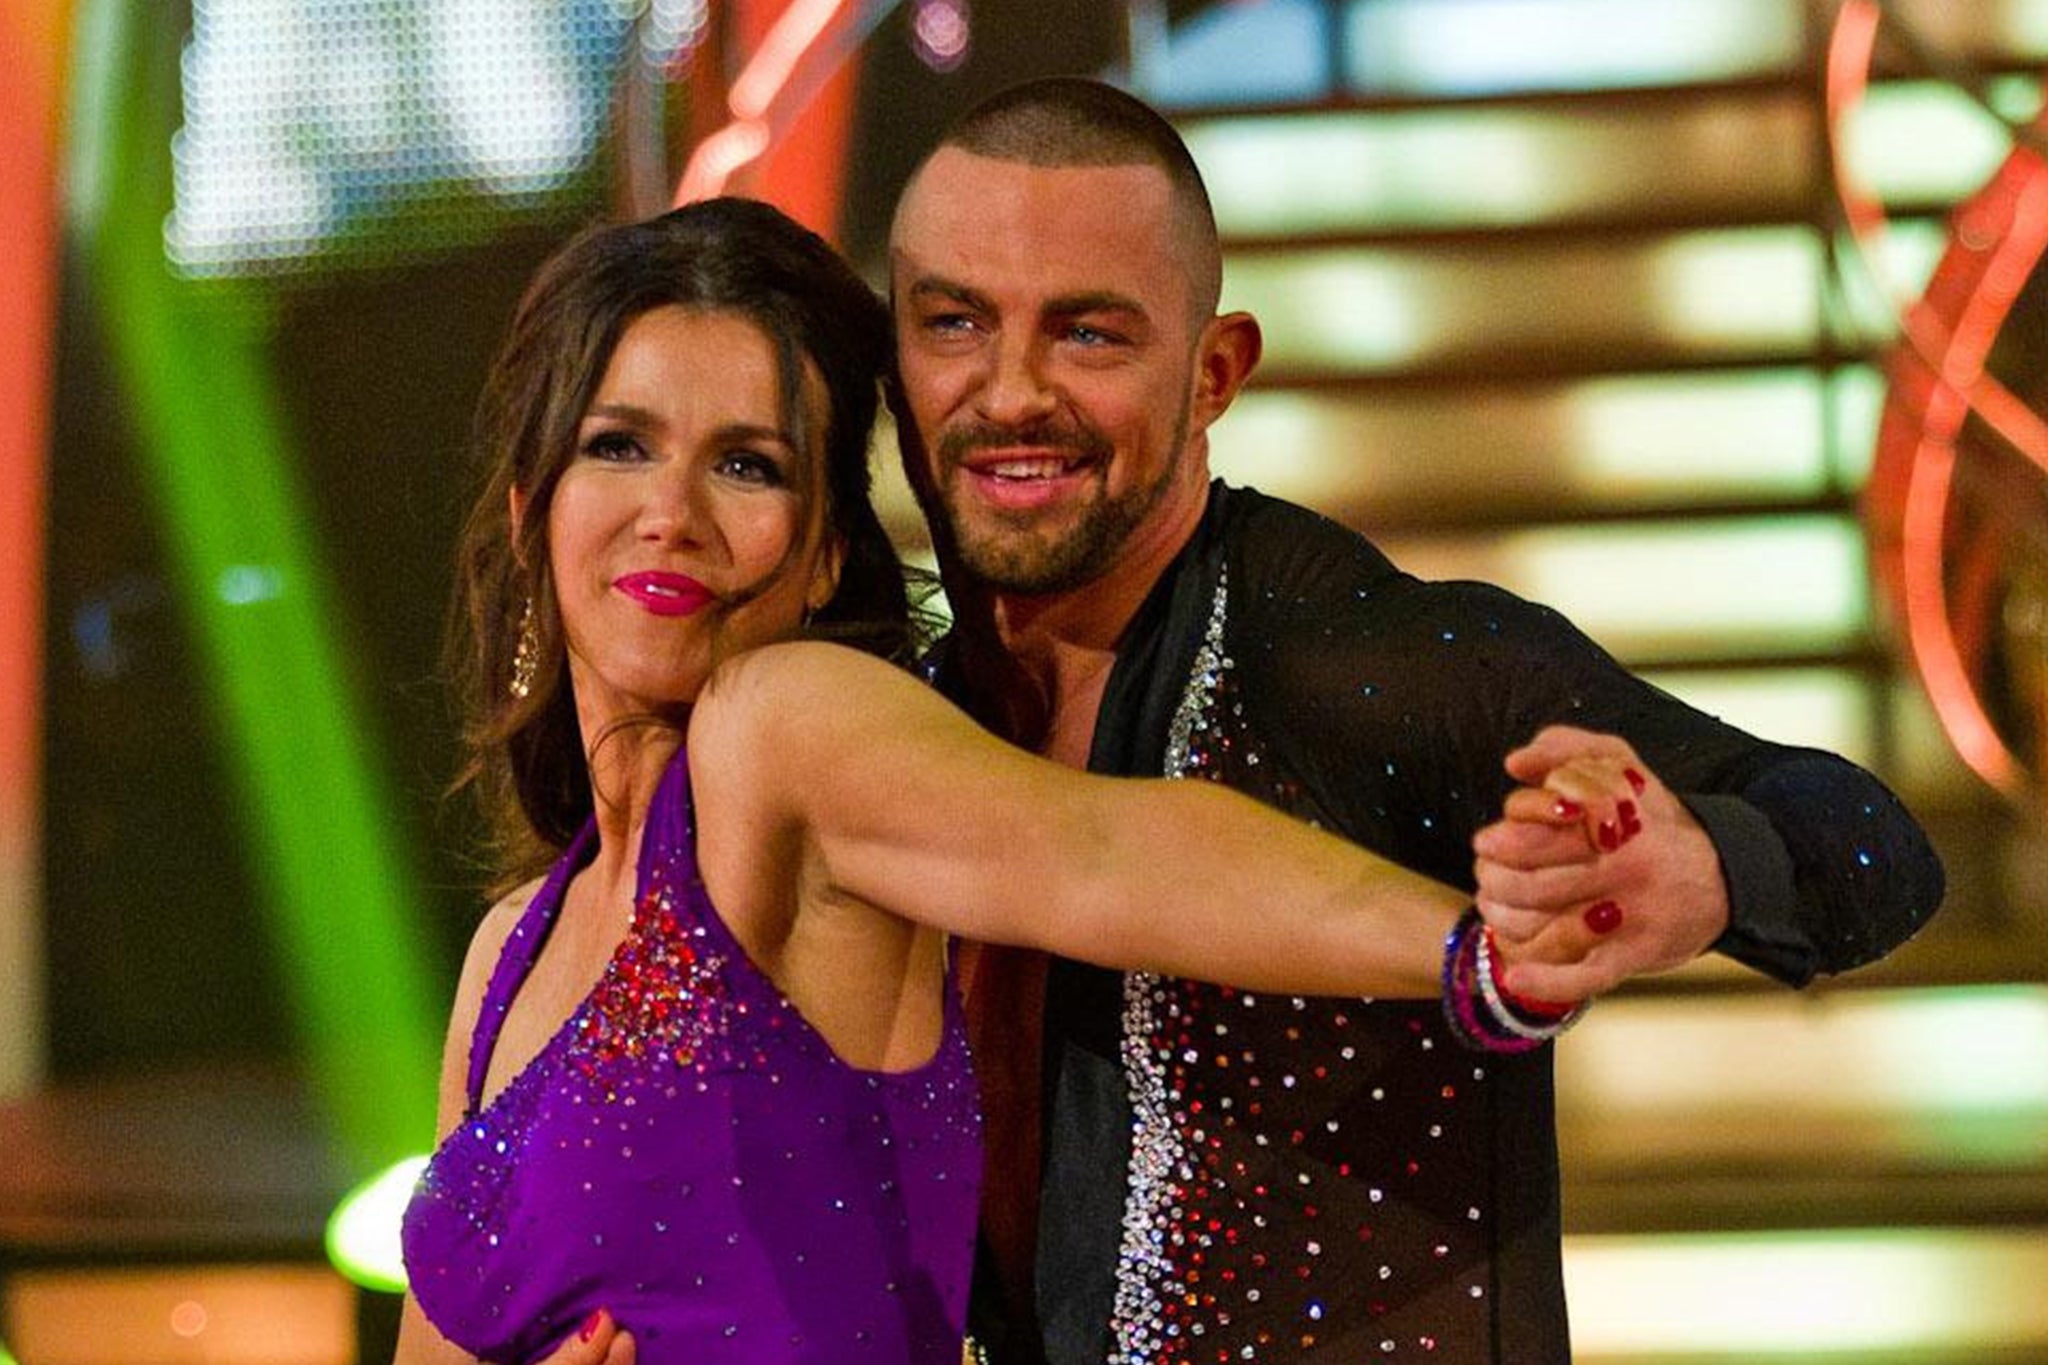 Reid and Windsor appearing on the Children in Need special of ‘Strictly’ in 2011